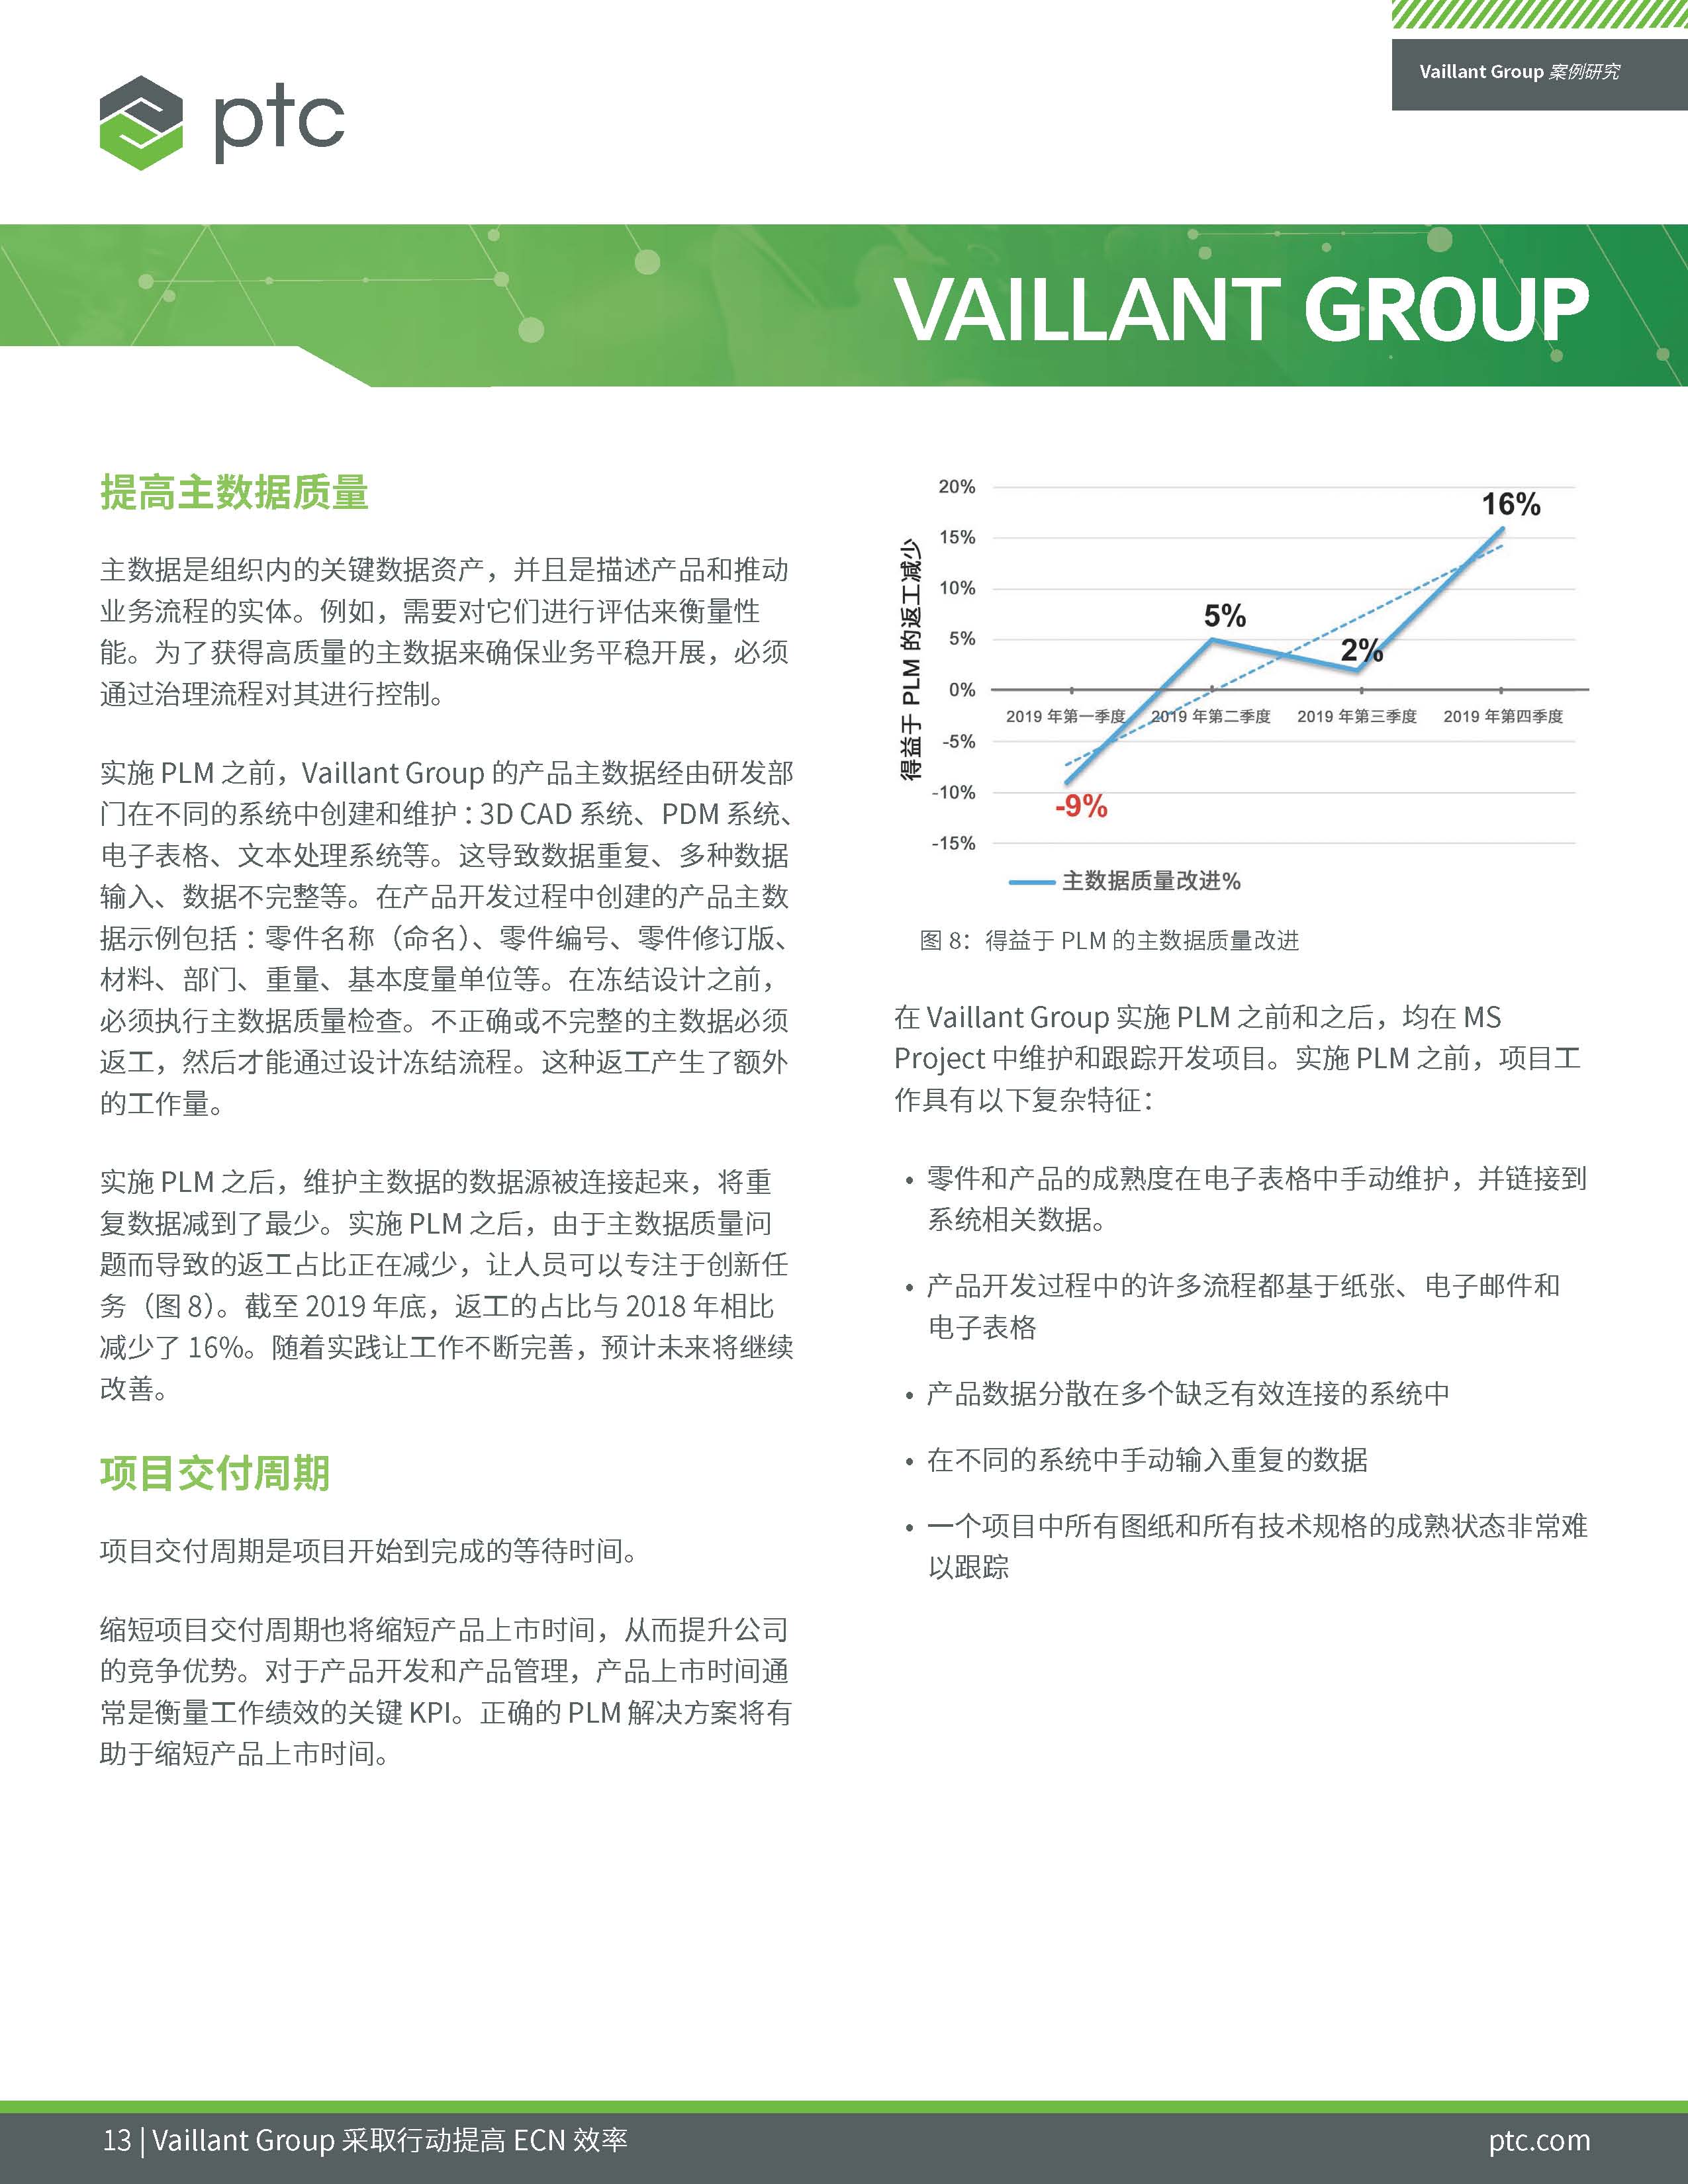 Vaillant Group's Digital Transformation (Chinese)_页面_13.jpg